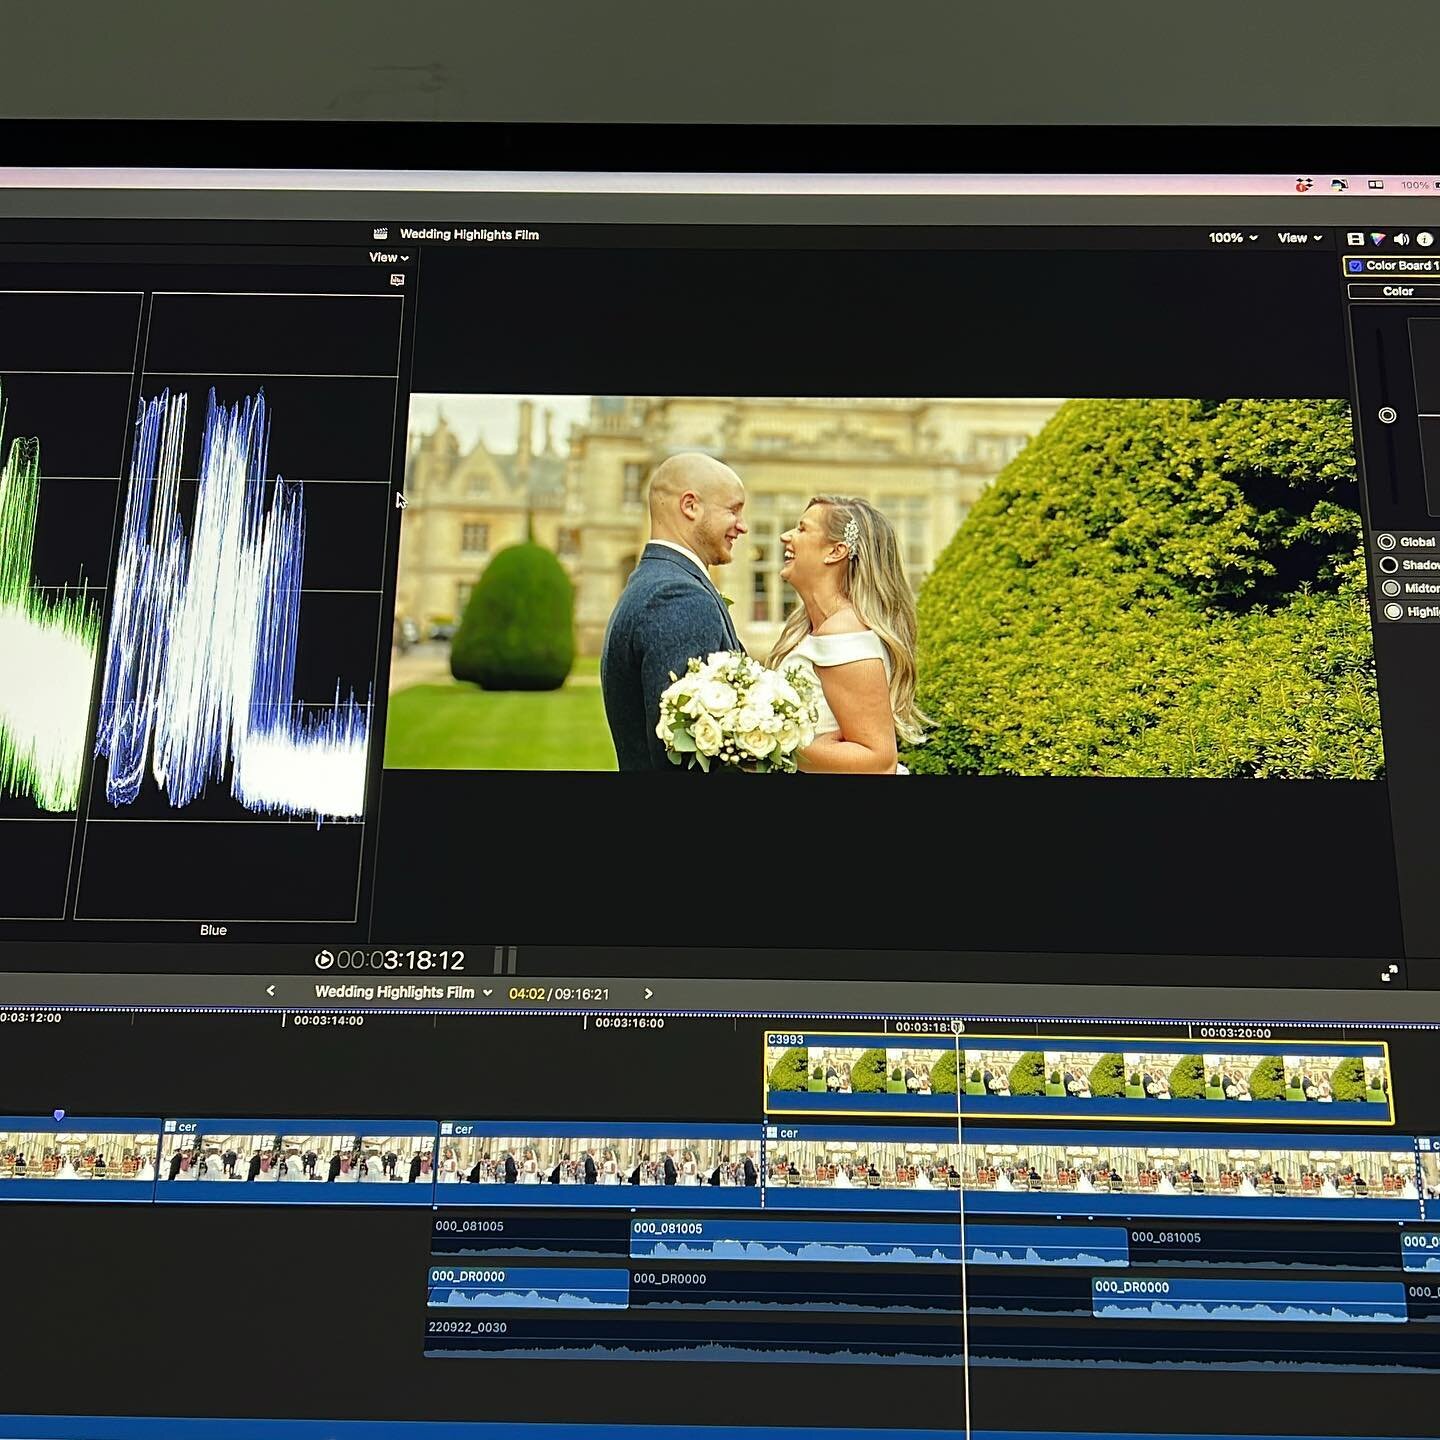 Natalie and Toms wedding film edit almost finished today from the lovely @stokerochfordhall